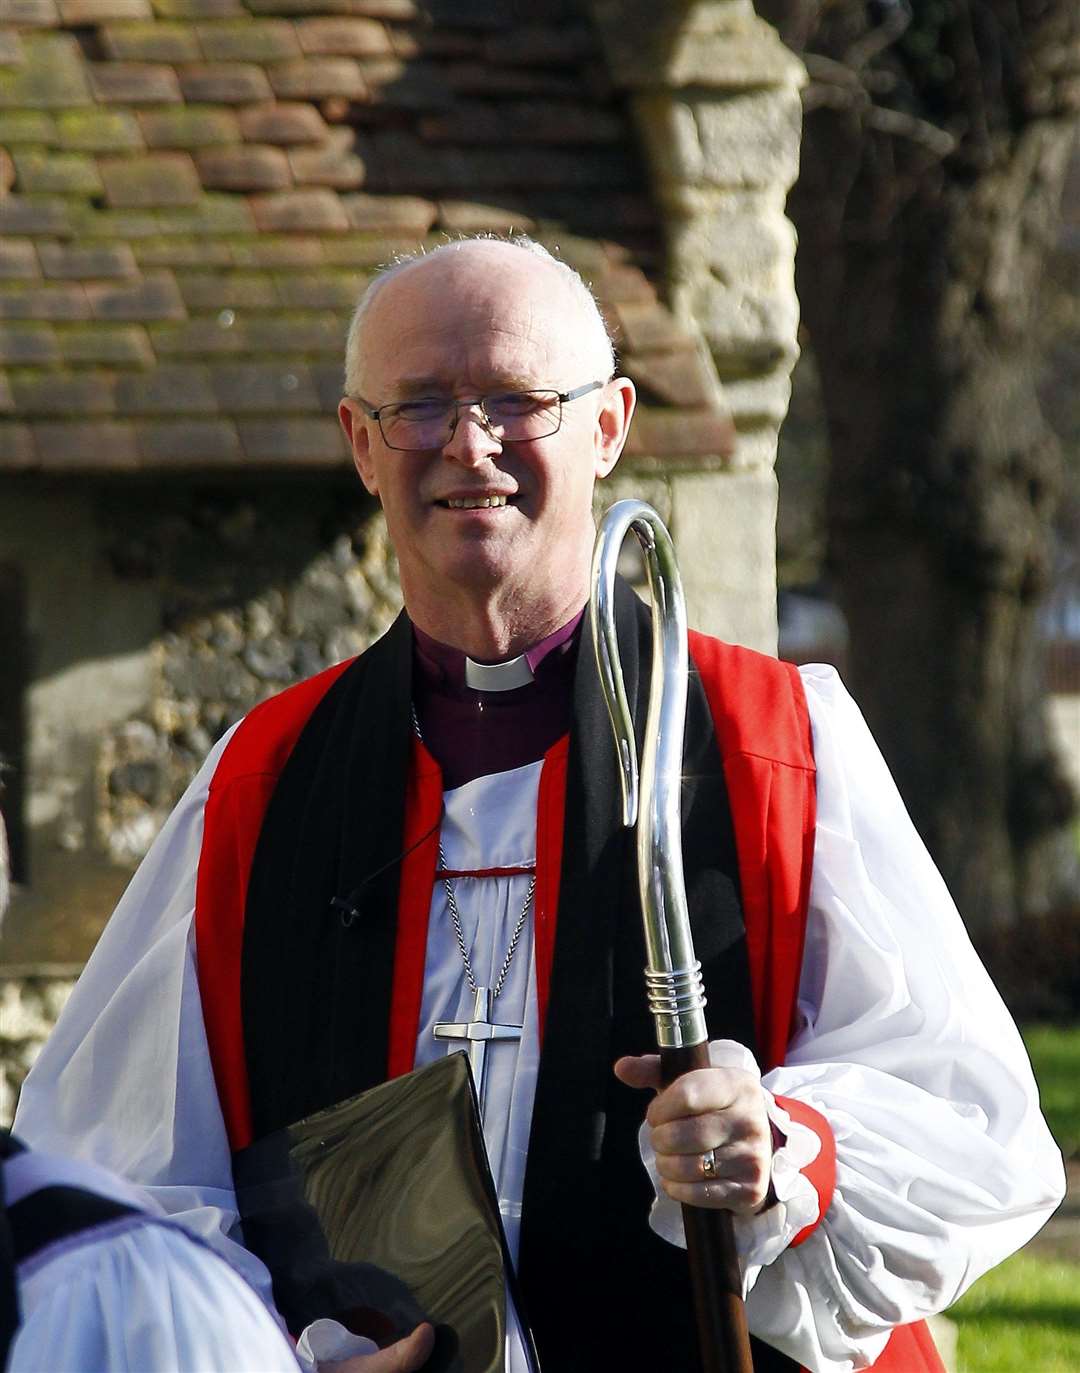 Bishop James has led the Diocese of Rochester for 10 years and has announced his retirement next July